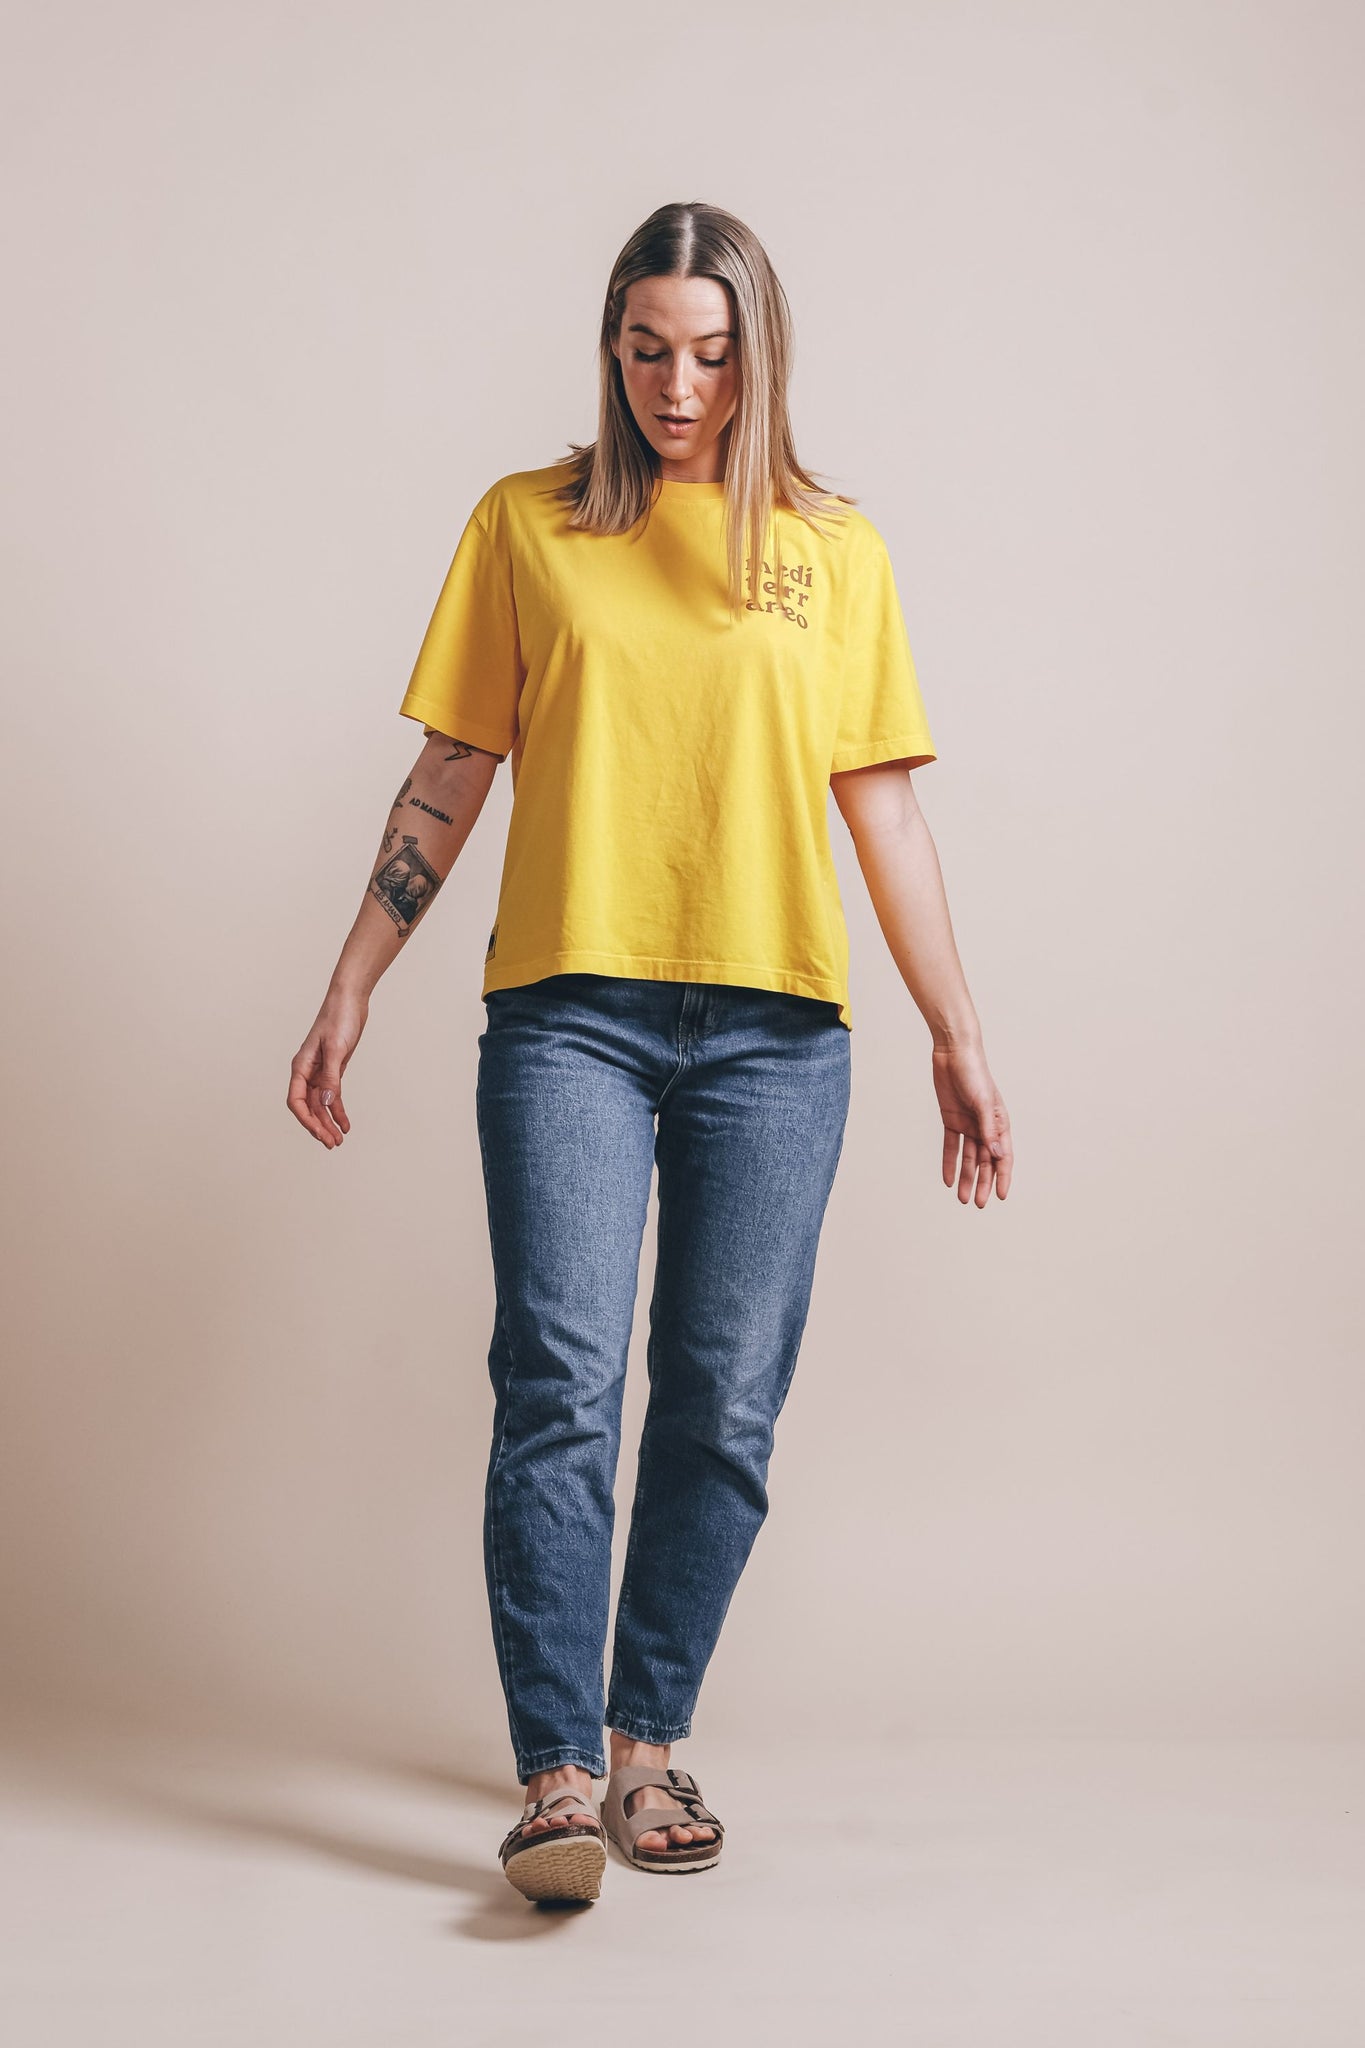 Camiseta Mujer Poniente Spectra Yellow